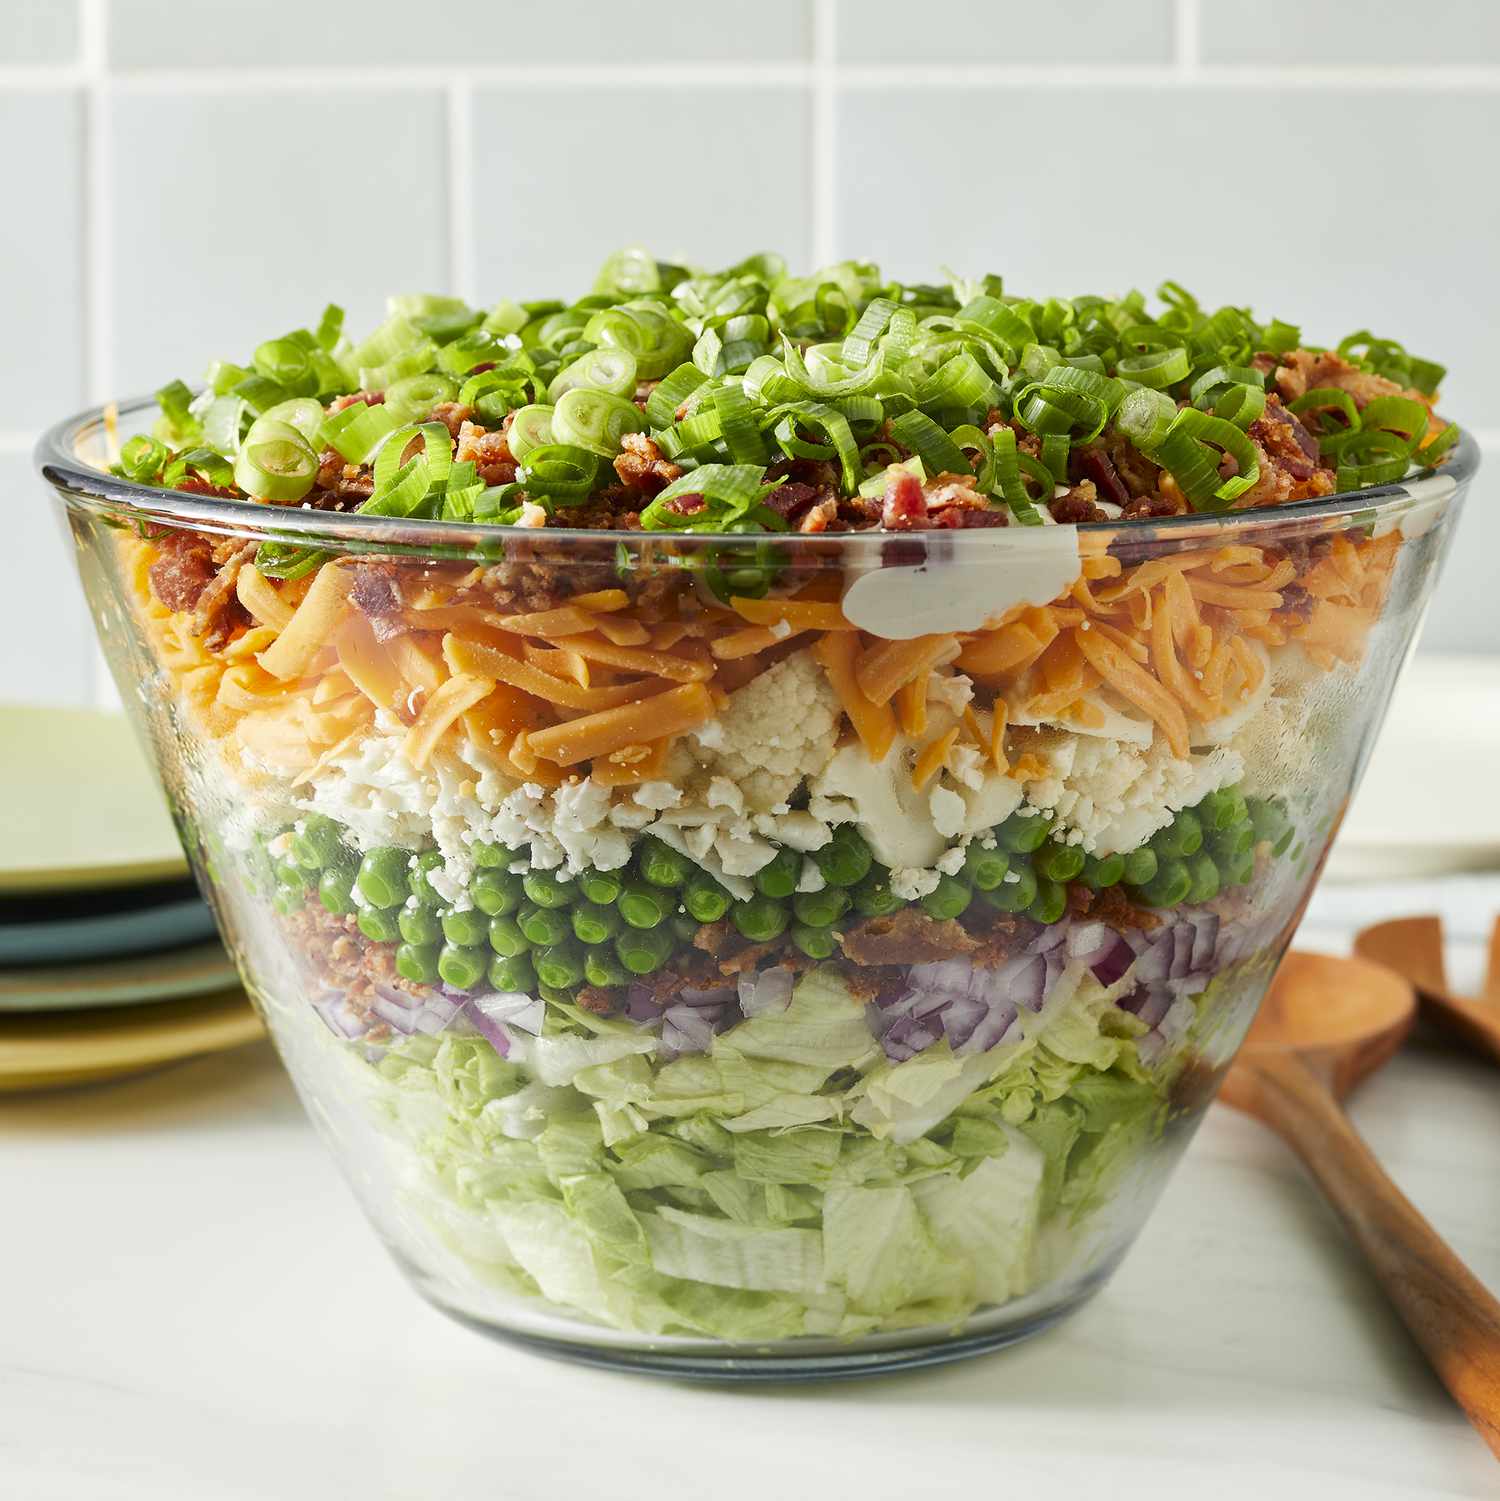 15 Light and Fresh Salad Recipes For Your Next Potluck